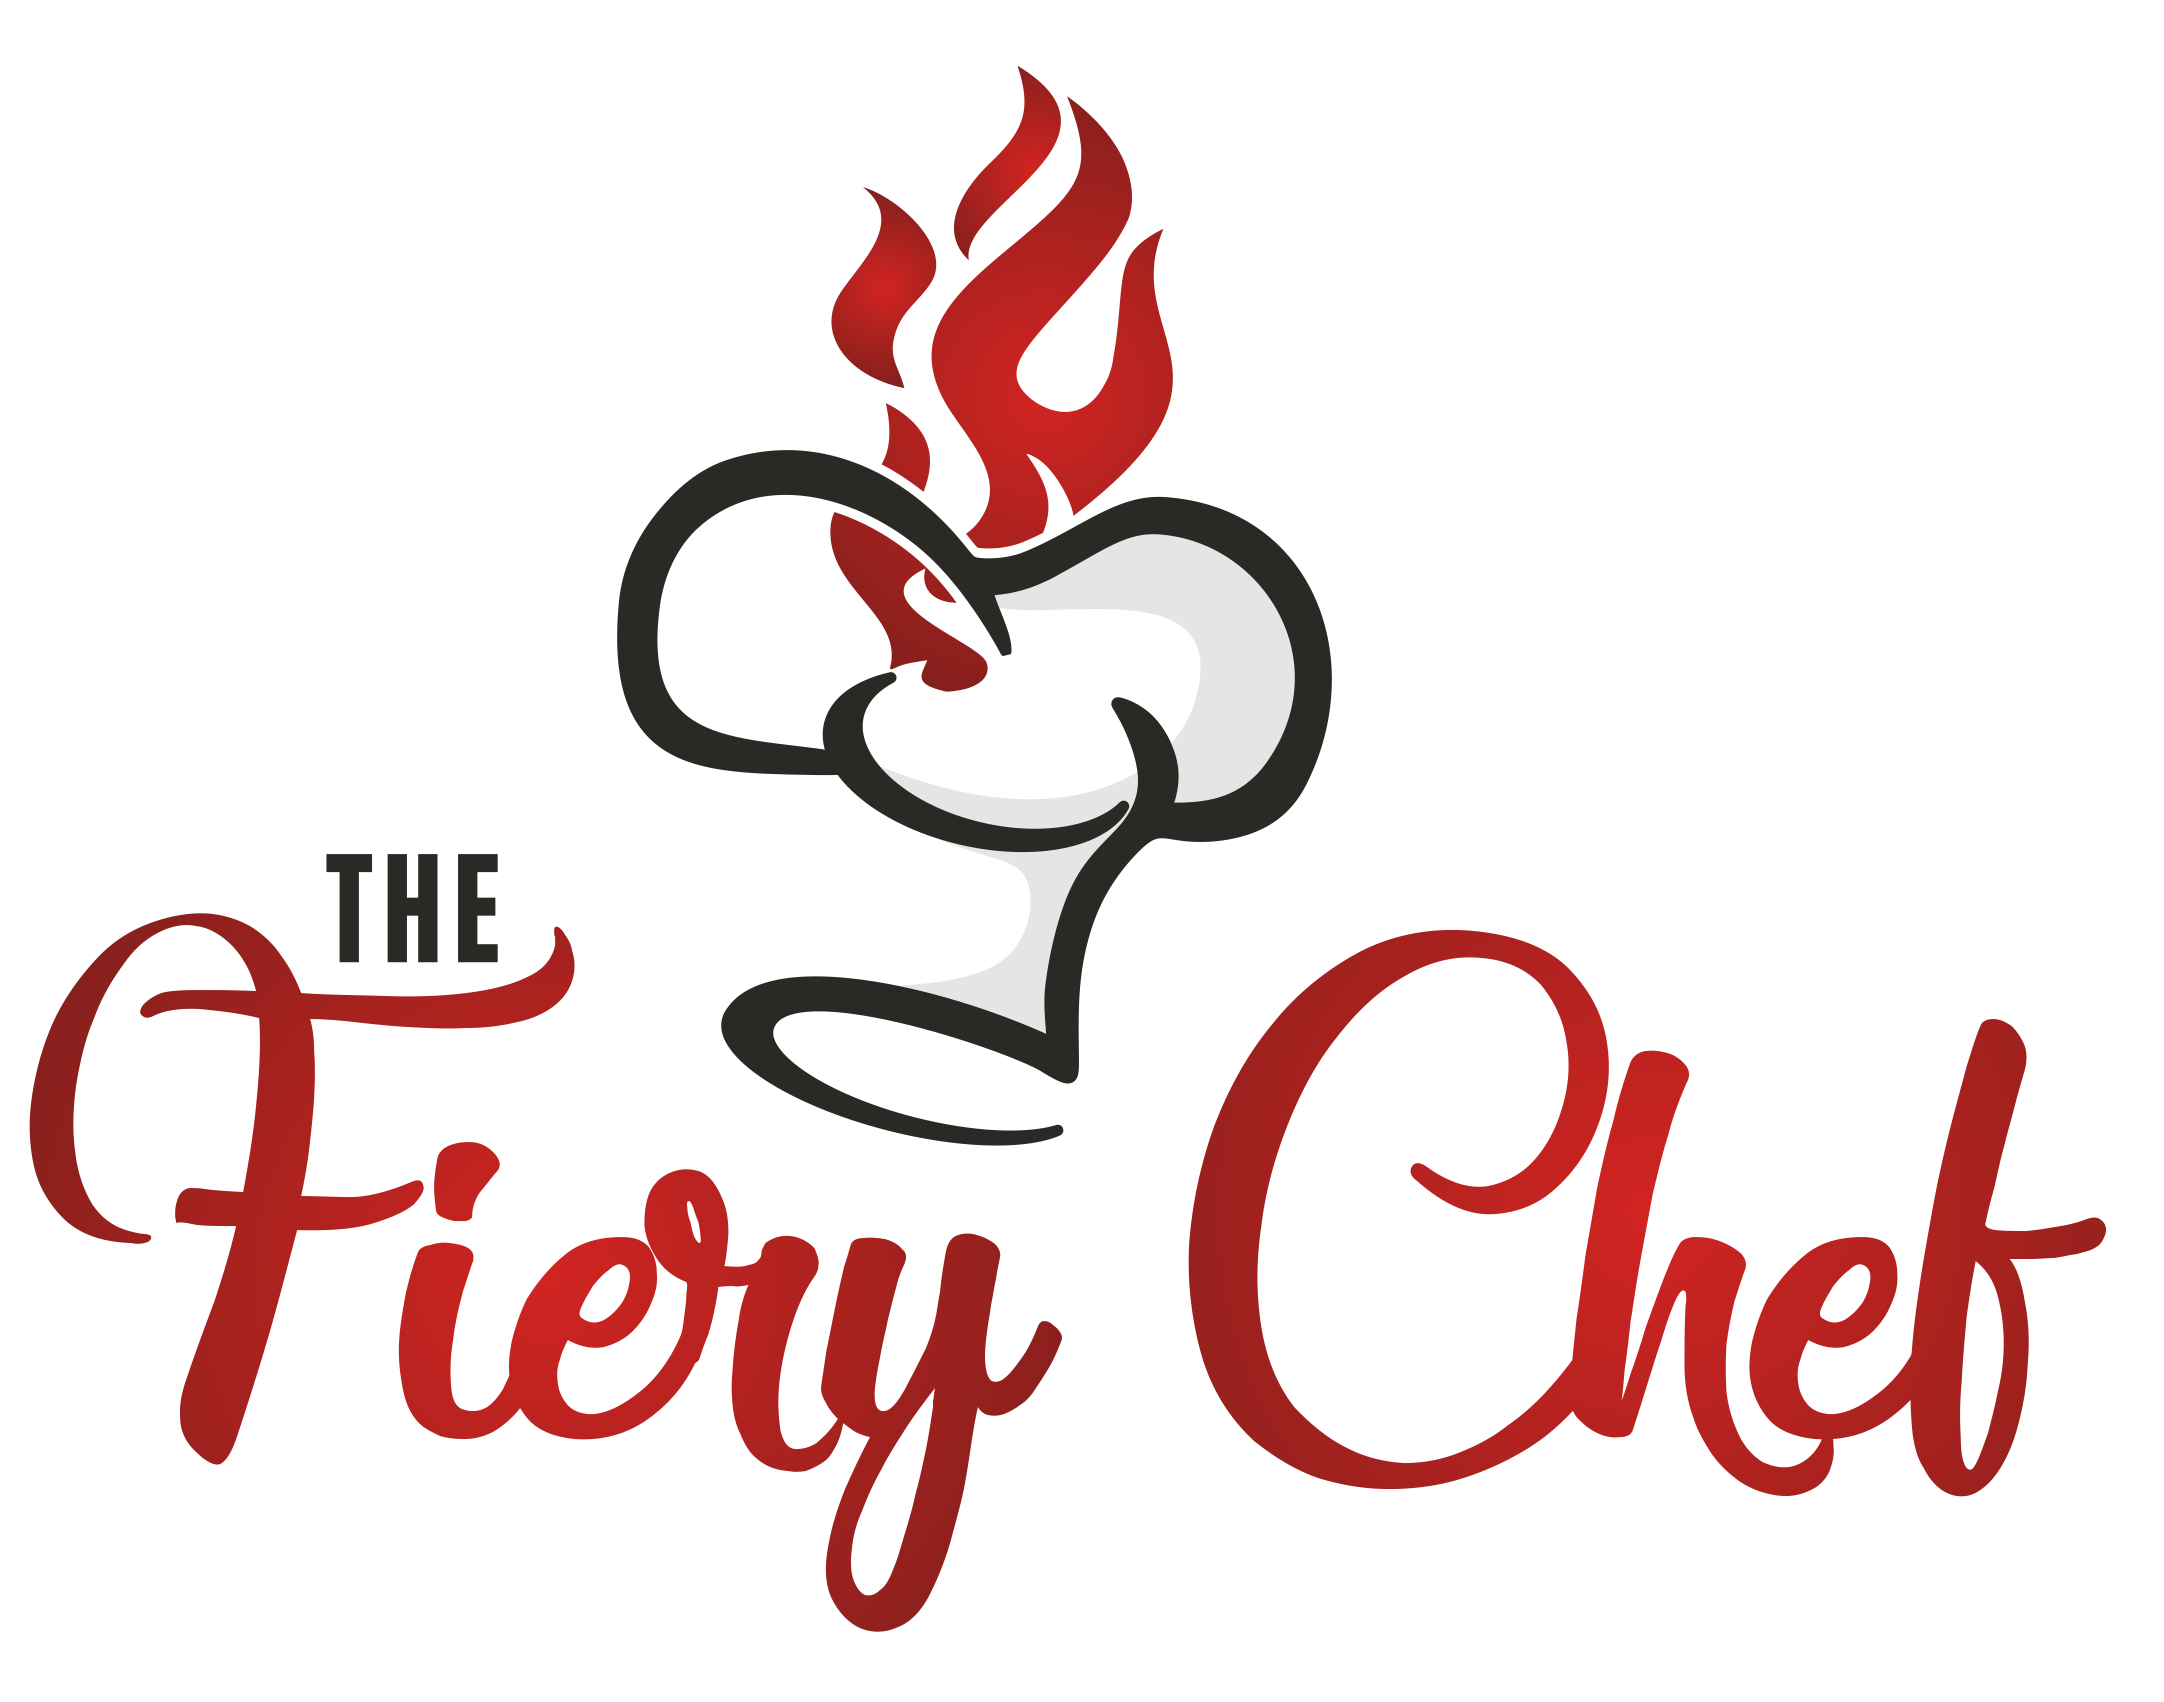 The Fiery Chef